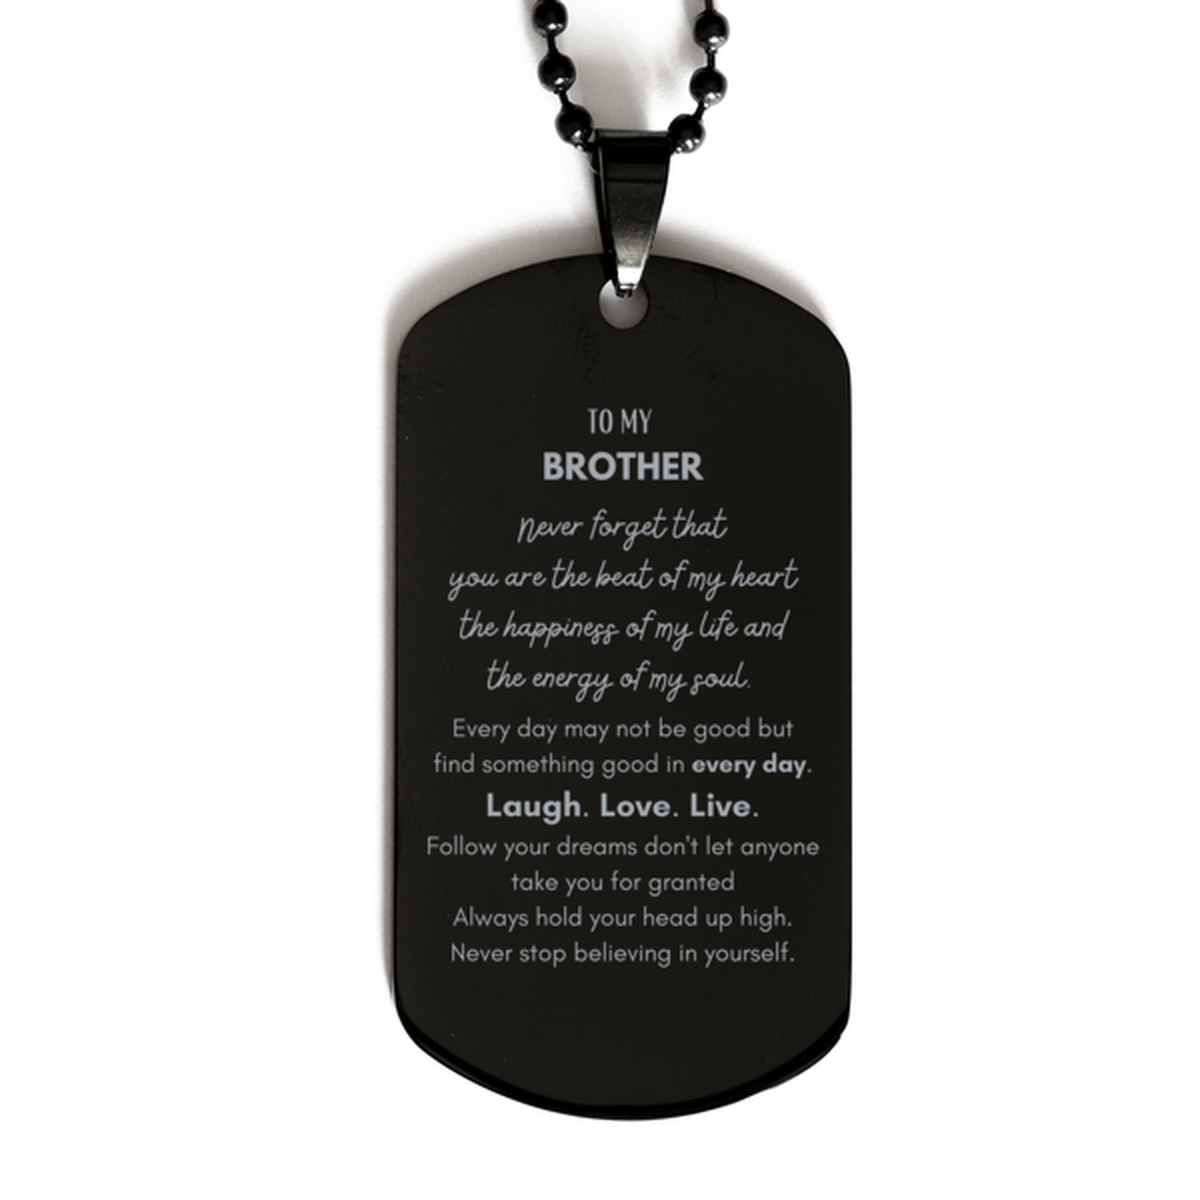 To My Brother Dogtag Gifts, Christmas Brother Black Dog Tag Present, Birthday Unique Motivational For Brother, To My Brother Never forget that you are the beat of my heart the happiness of my life and the energy of my soul